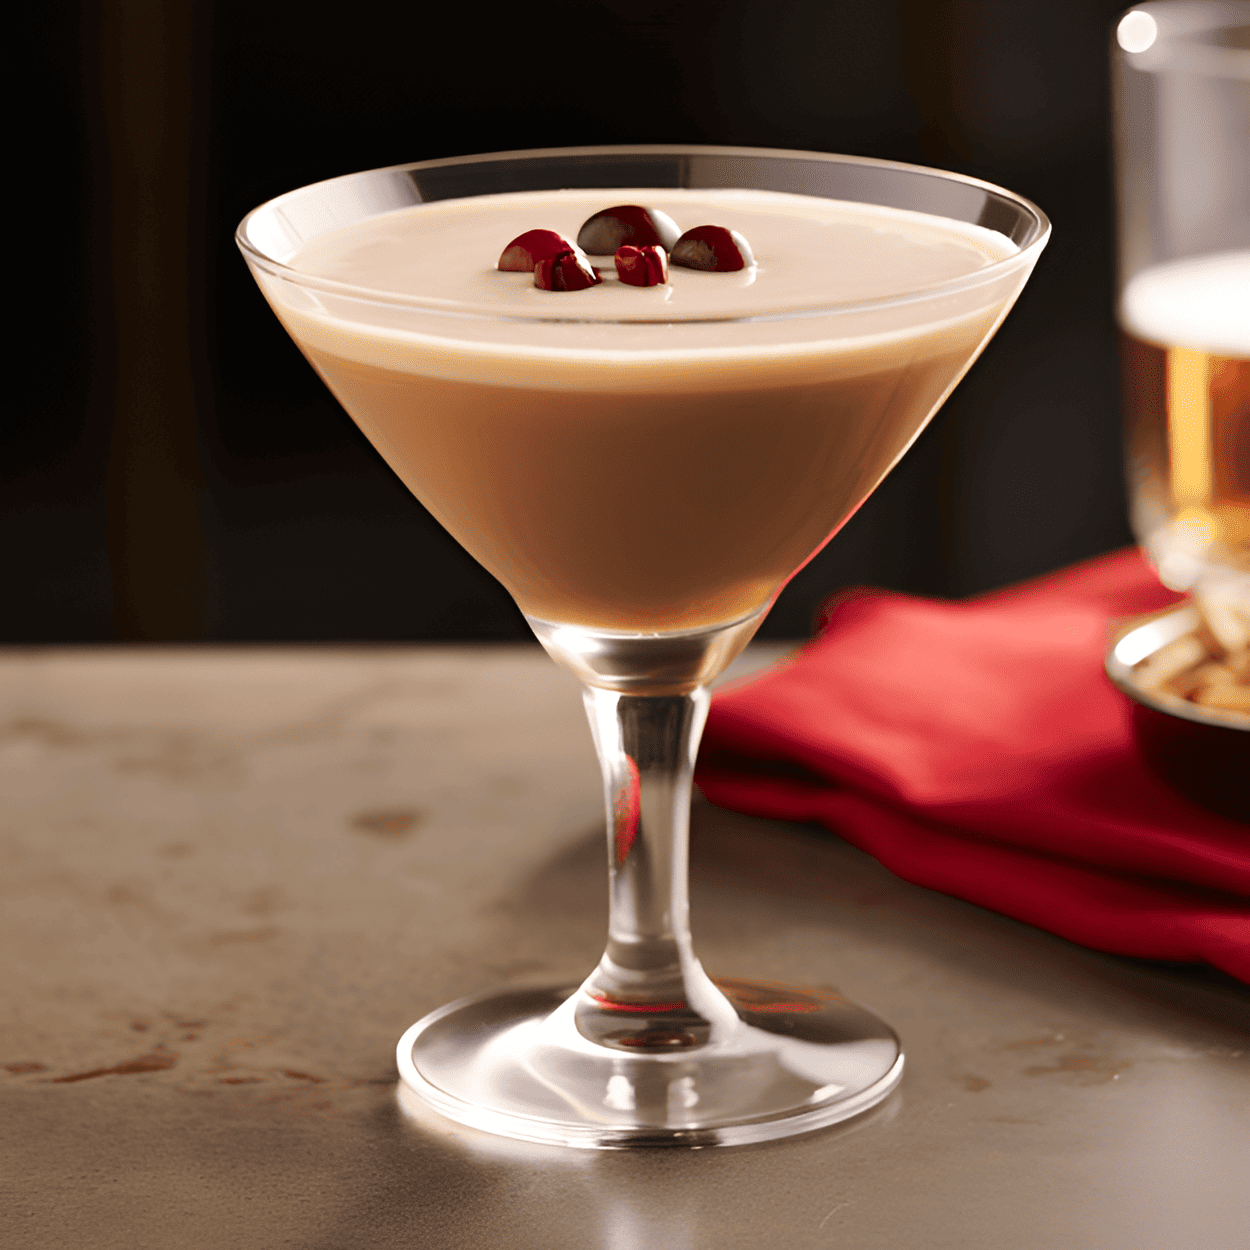 Buttered Toffee Cocktail Recipe - The Buttered Toffee cocktail is a delightful blend of sweet, creamy, and rich flavors. The taste of toffee is prominent, complemented by the smoothness of cream and the warmth of whiskey. It's a decadent drink, with a buttery texture and a hint of vanilla.